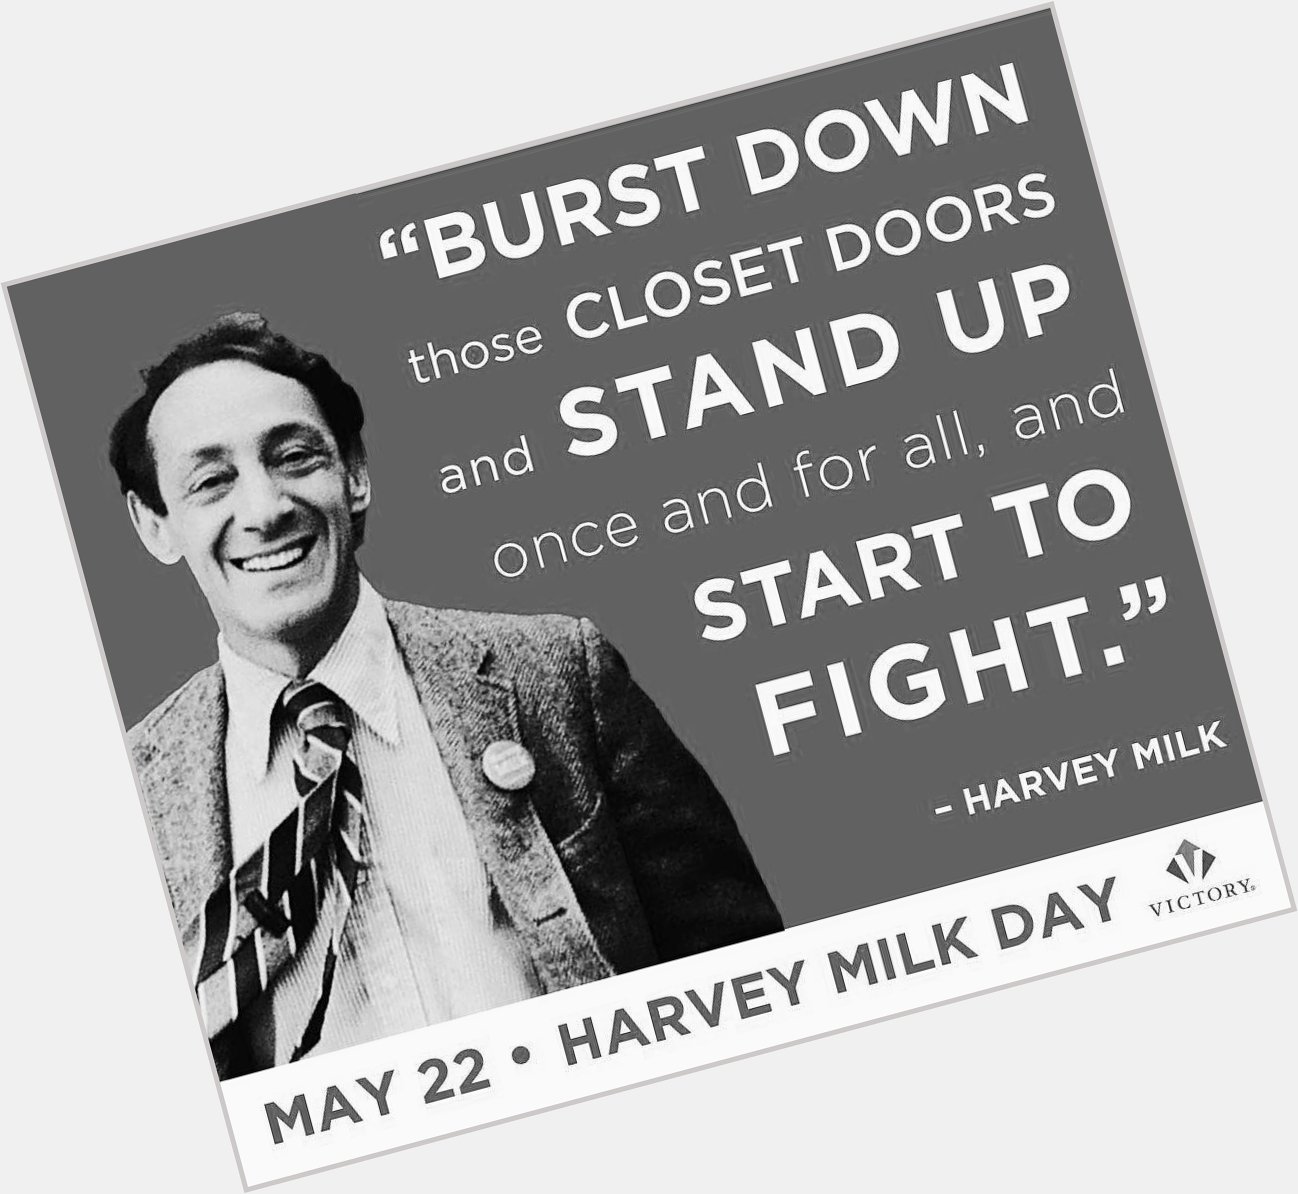 Happy birthday to the first Gay person to be elected to office in California & LGBTQ campaigner Harvey Milk (R.I.P) 